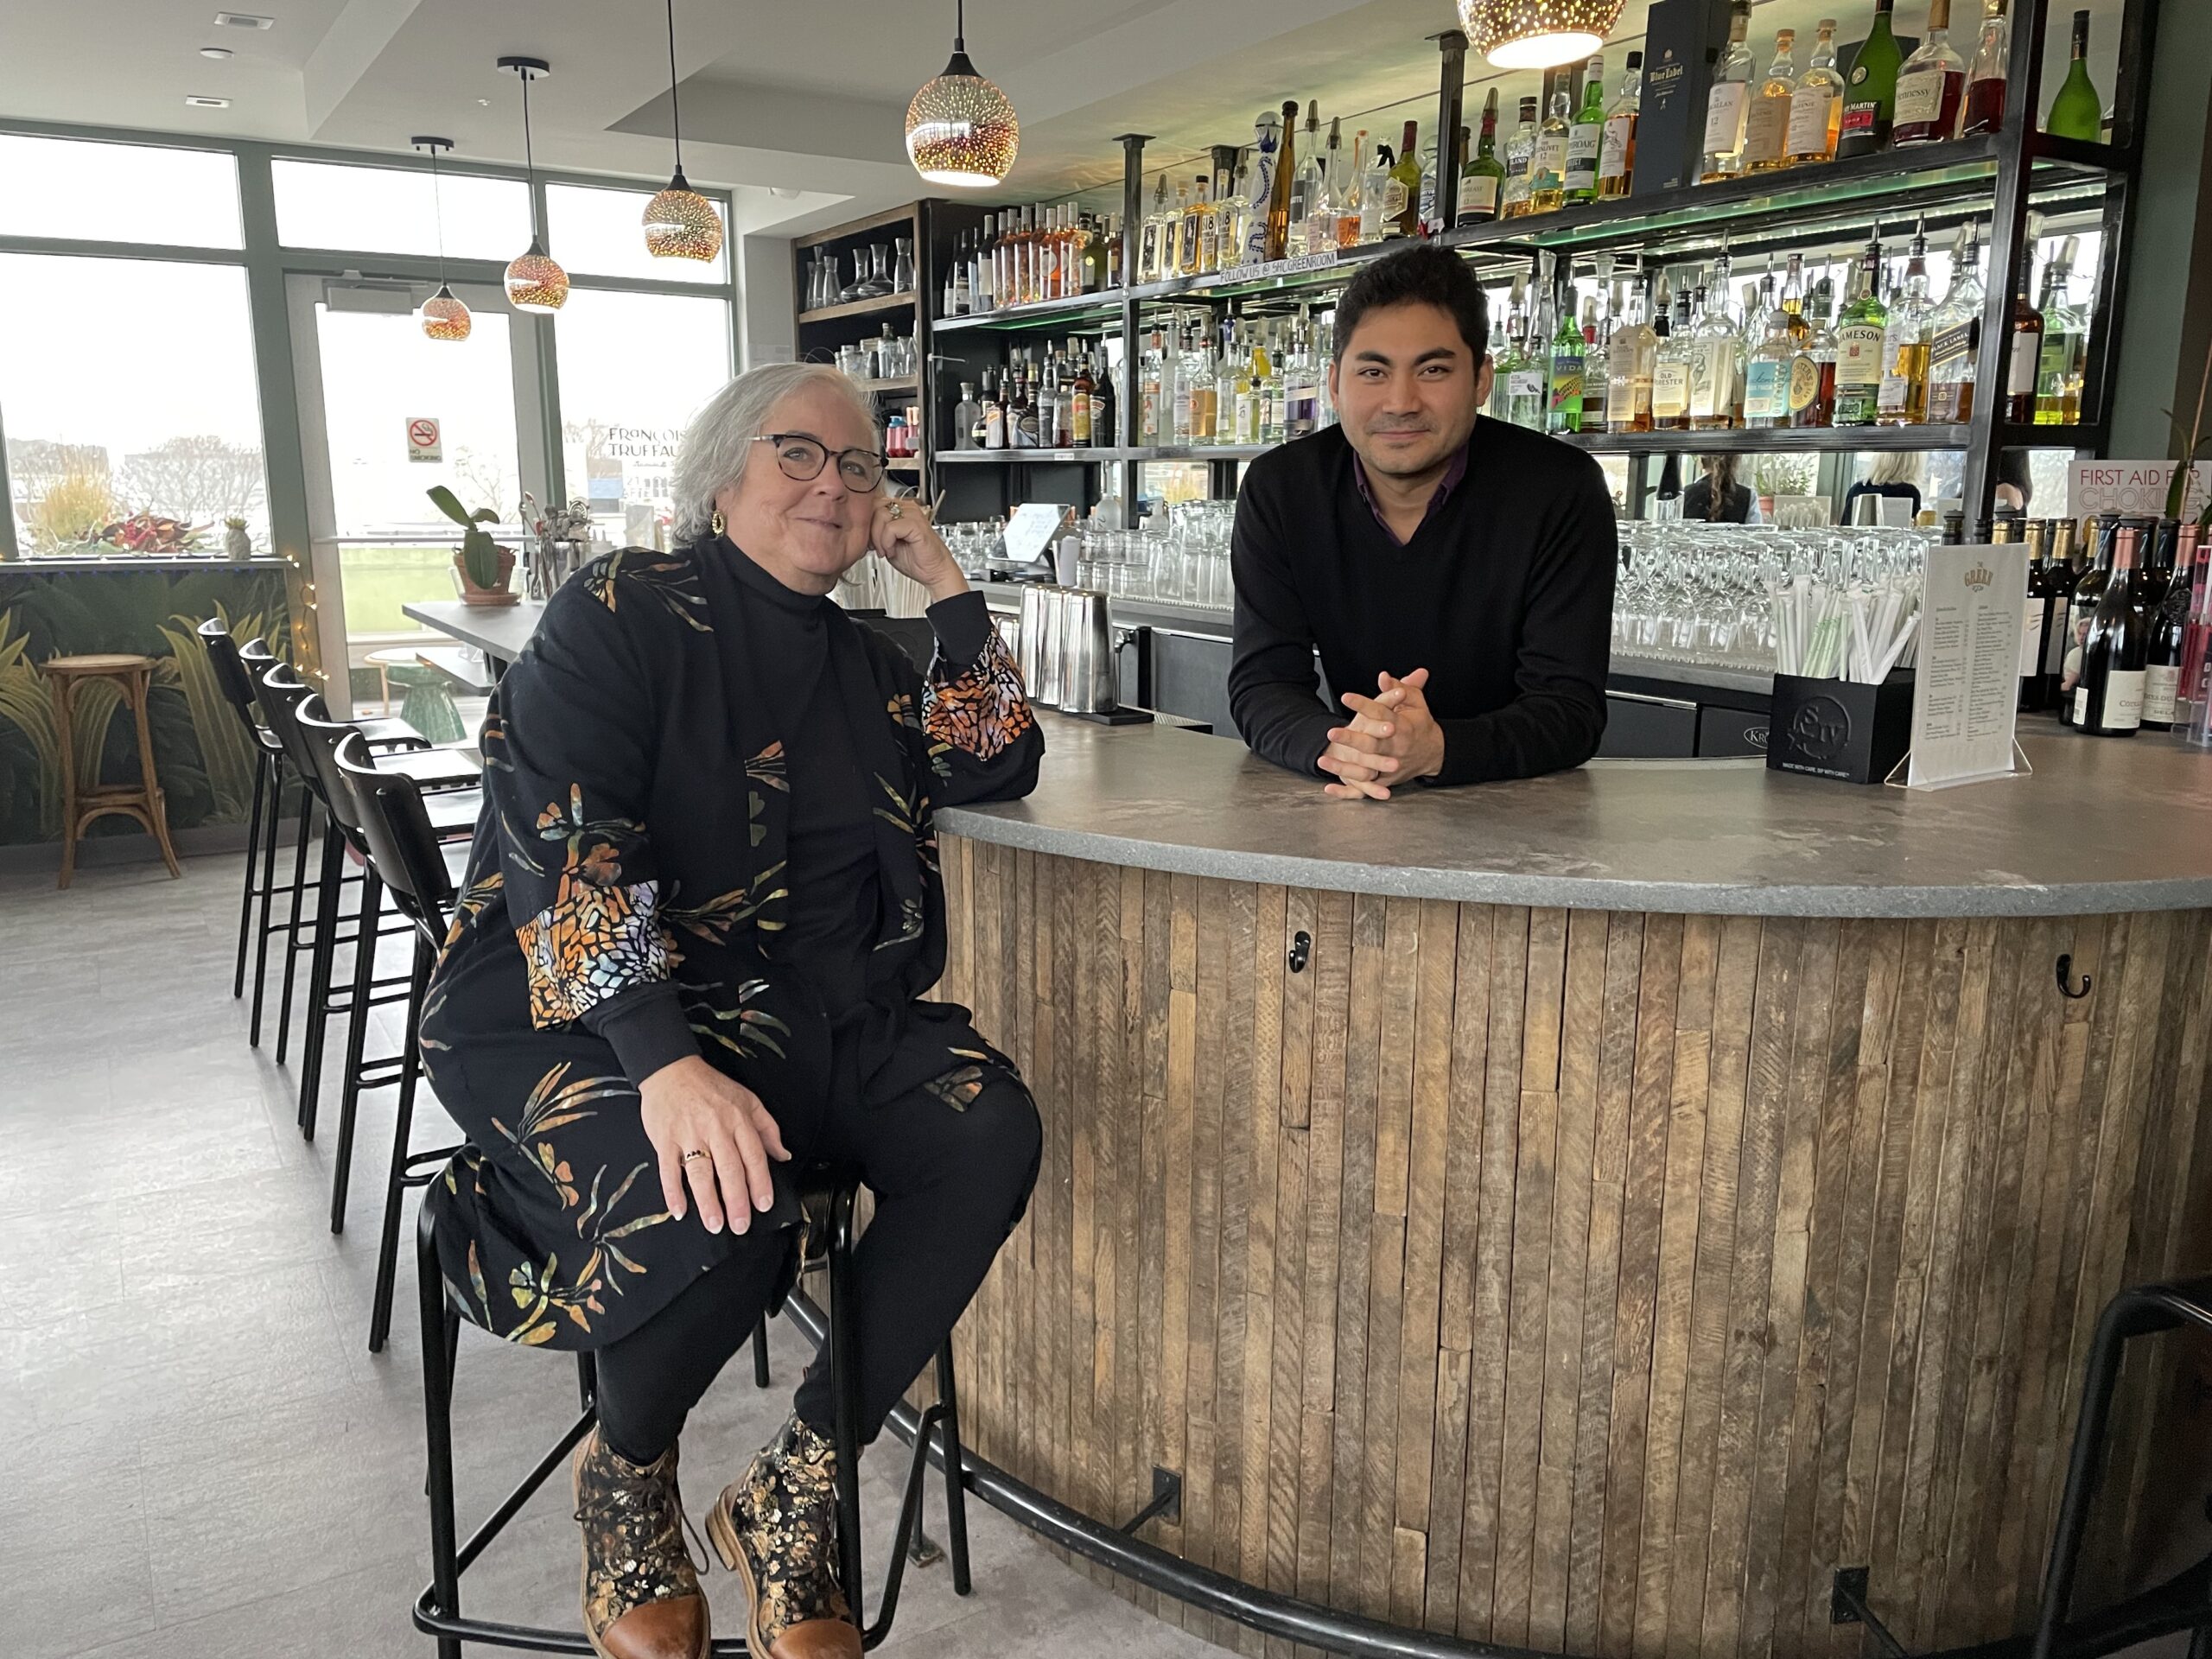 Sag Harbor Chamber of Commerce President Ellen Dioguardi with Jesse Matsuoka, the food and beverage director of the Sag Harbor Cinema, in the cinema’s Green Room Bar, which will host a HarborFrost Kickoff Party and Winter Taste of Sag Harbor on Friday, February 3. GAVIN MENU